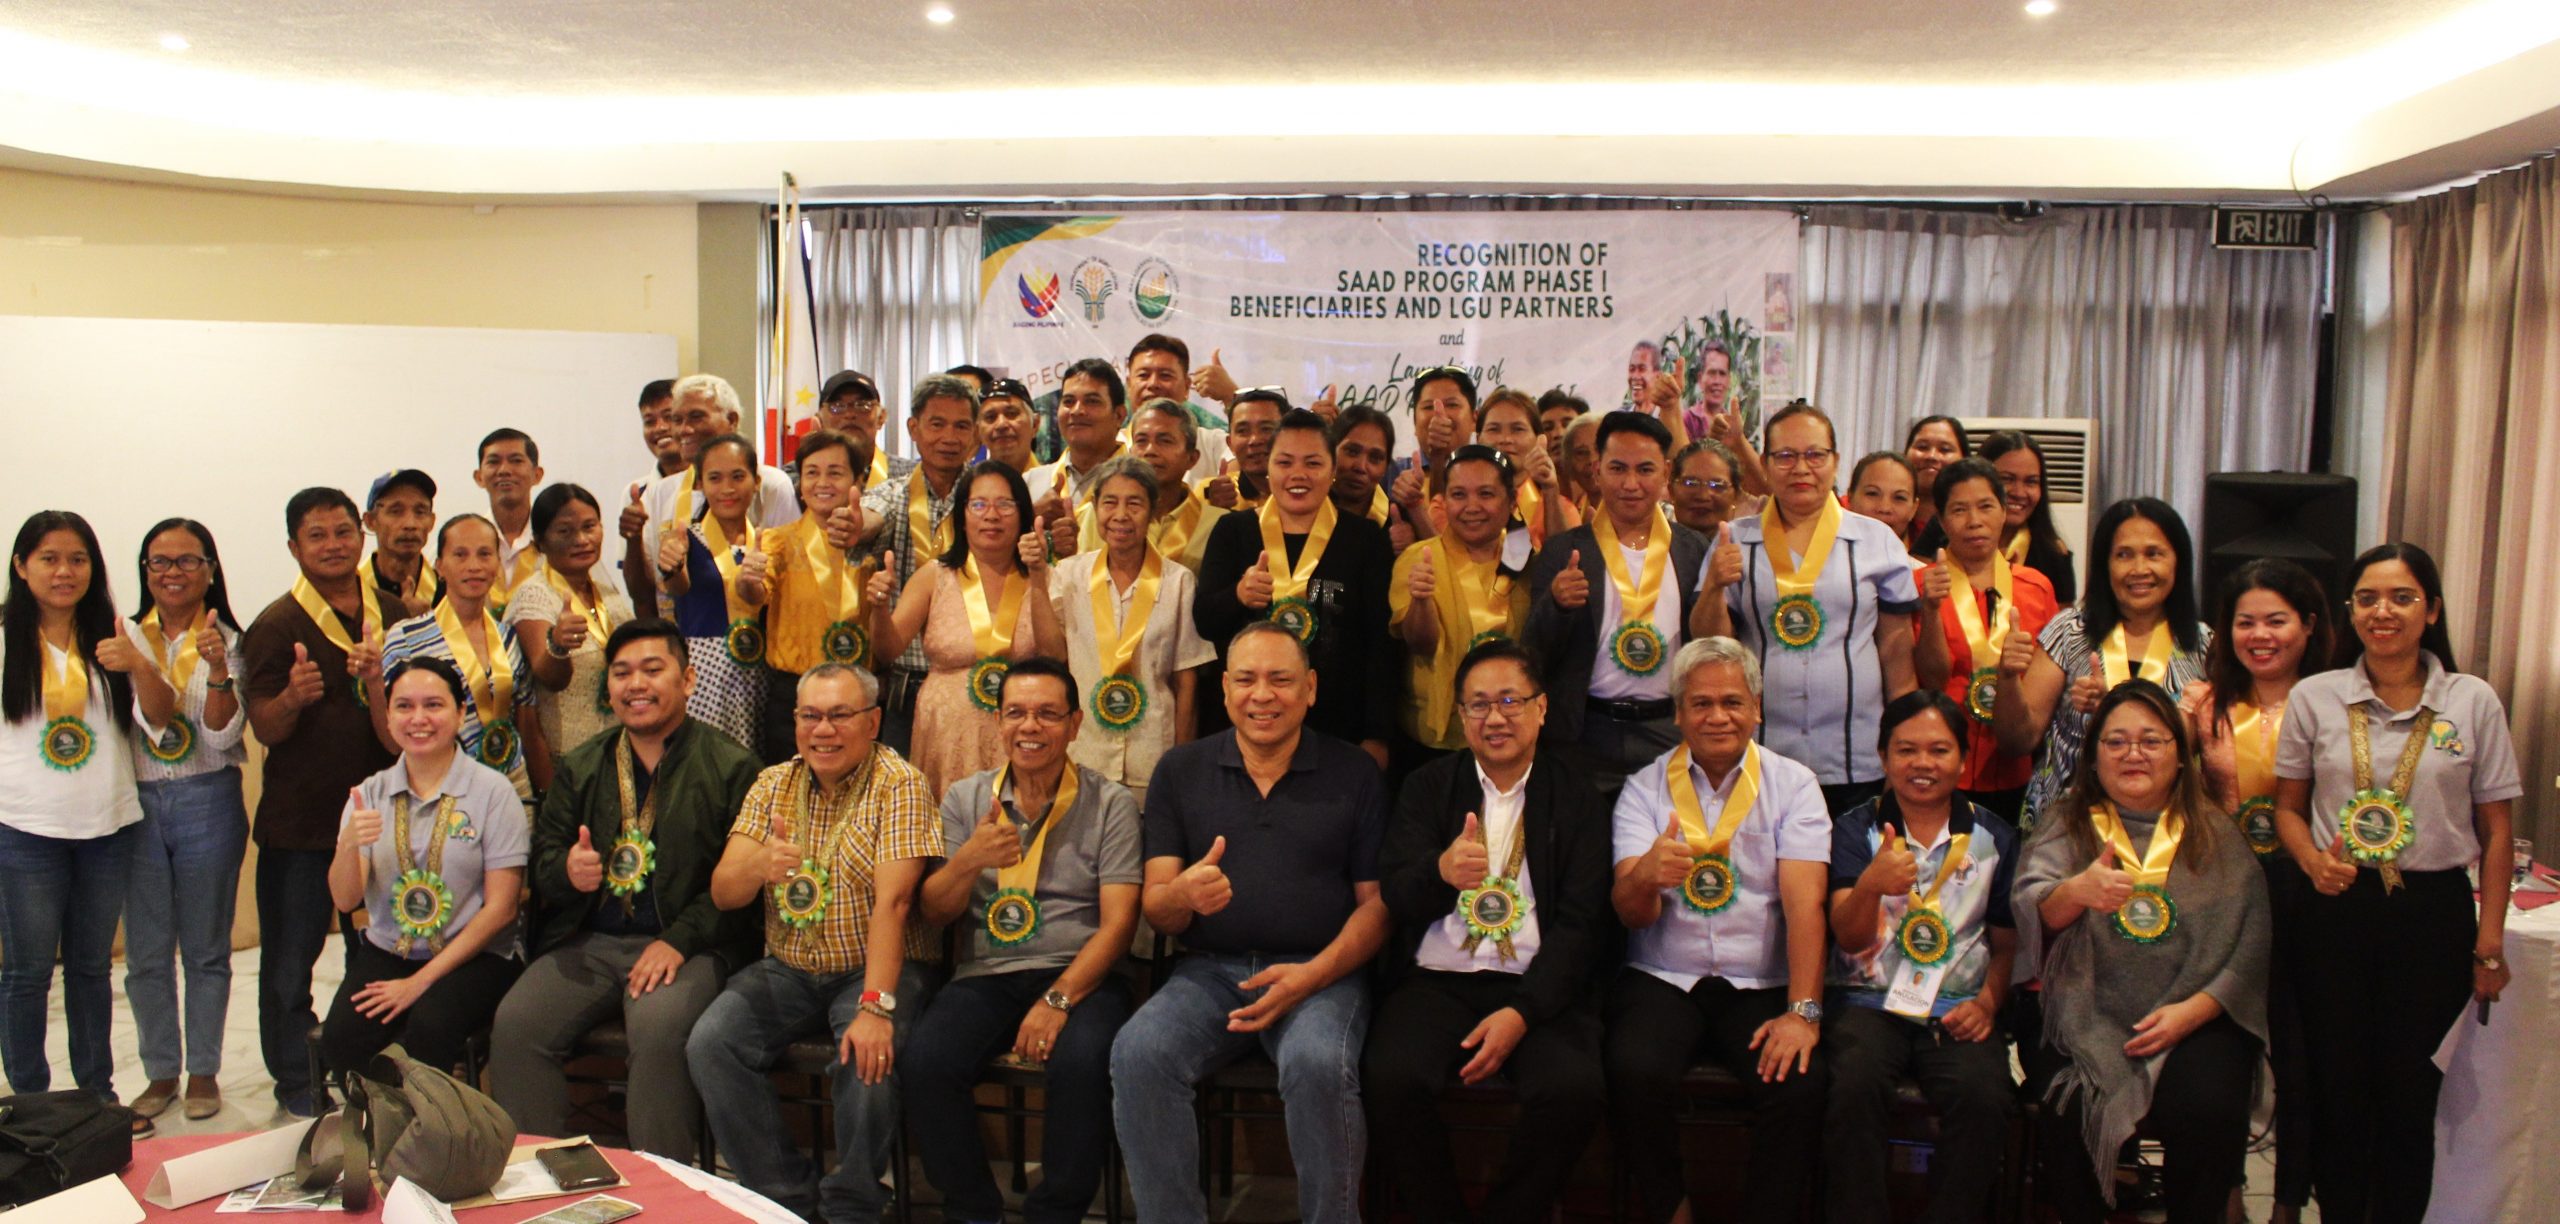 National Director leads SAAD Phase 2 launching, turnover of Phase 1 beneficiaries to LGUs